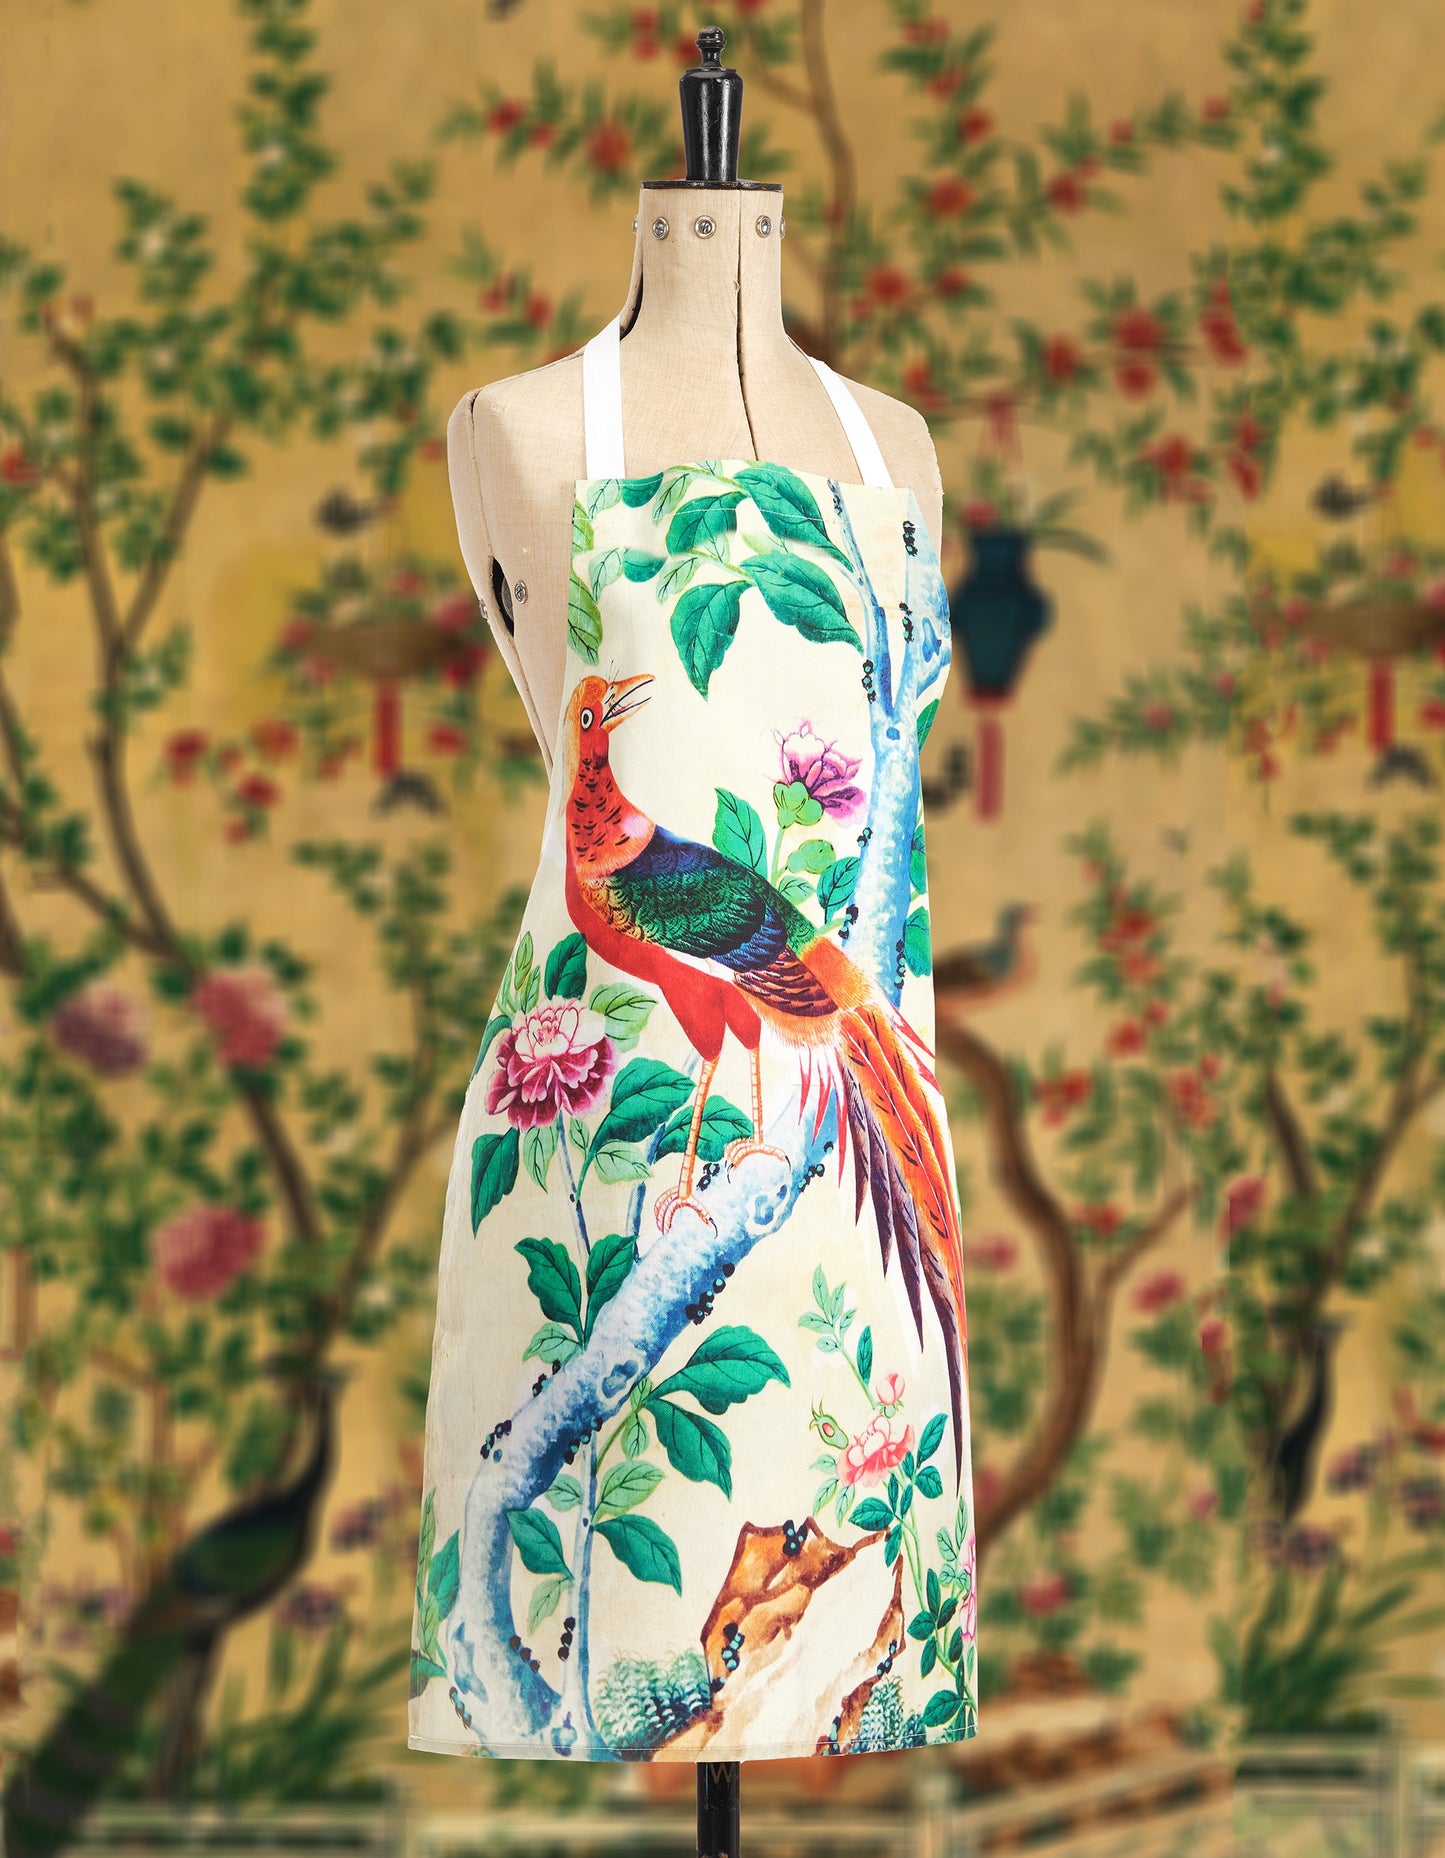 A mannequin wearing a pastel yellow apron decorated with birds, flowers and leaves in front of a matching yellow background.